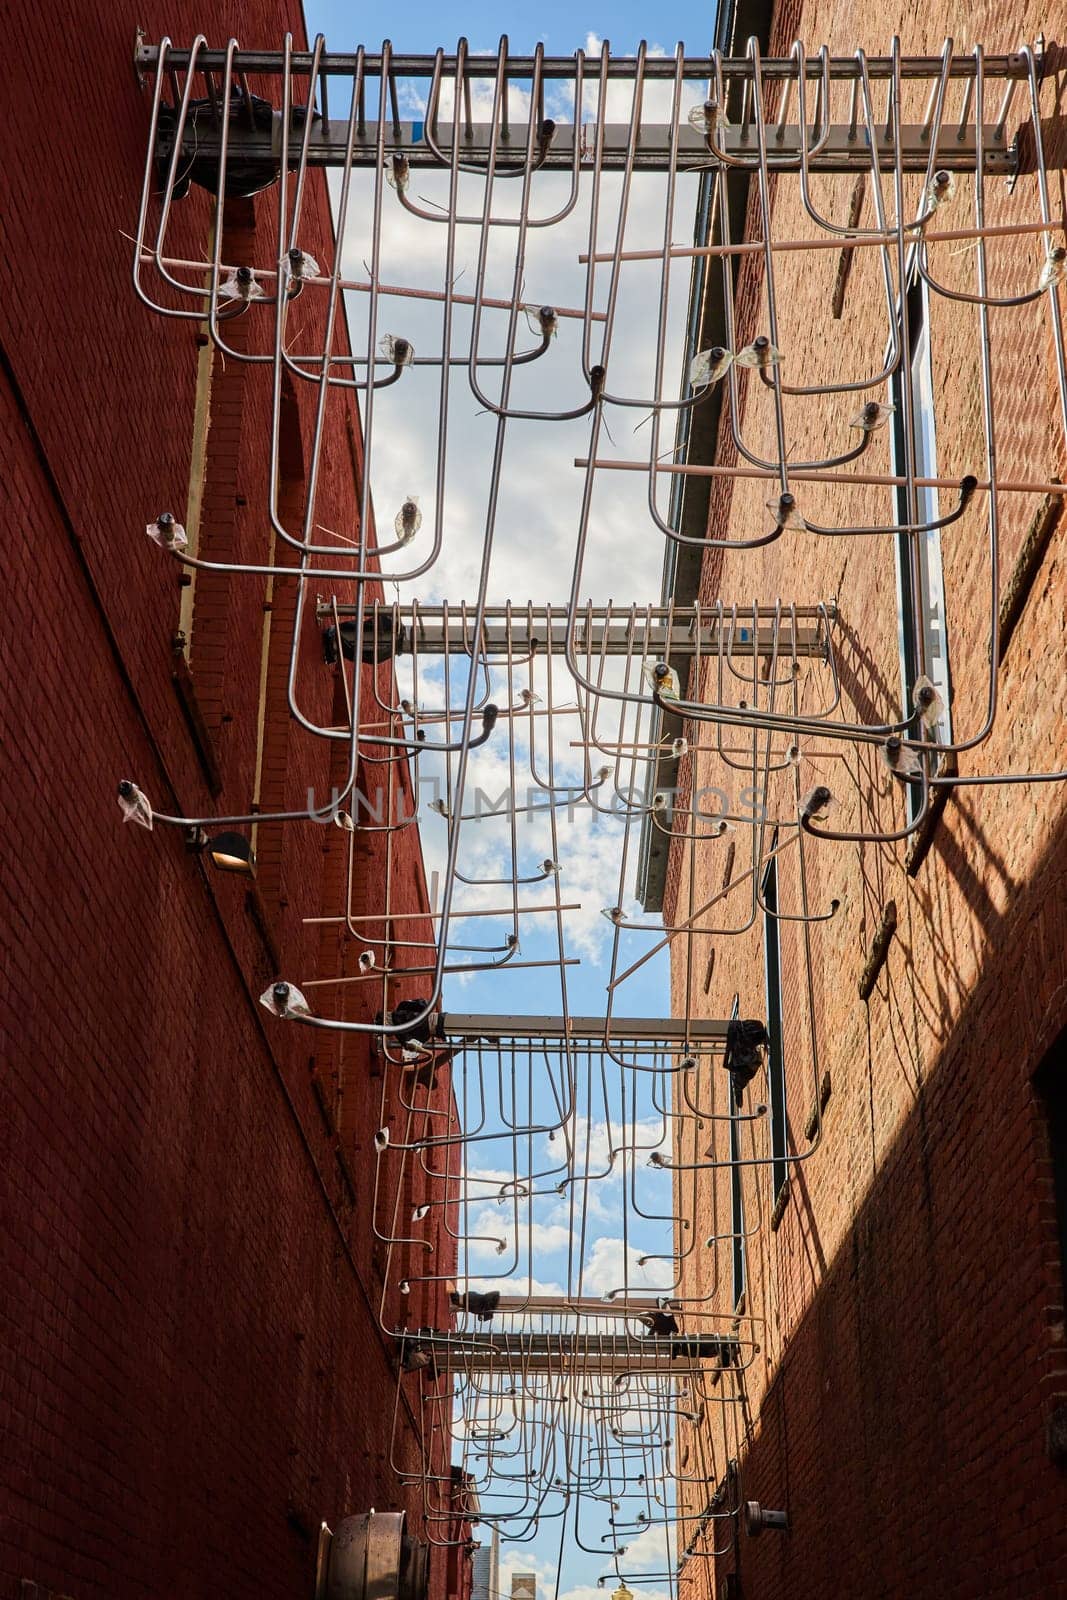 Daytime View of Pigeons Perched on Geometric Fire Escapes Between Brick Buildings in Downtown Muncie, Indiana - A Striking Display of Urban Wildlife and Architecture